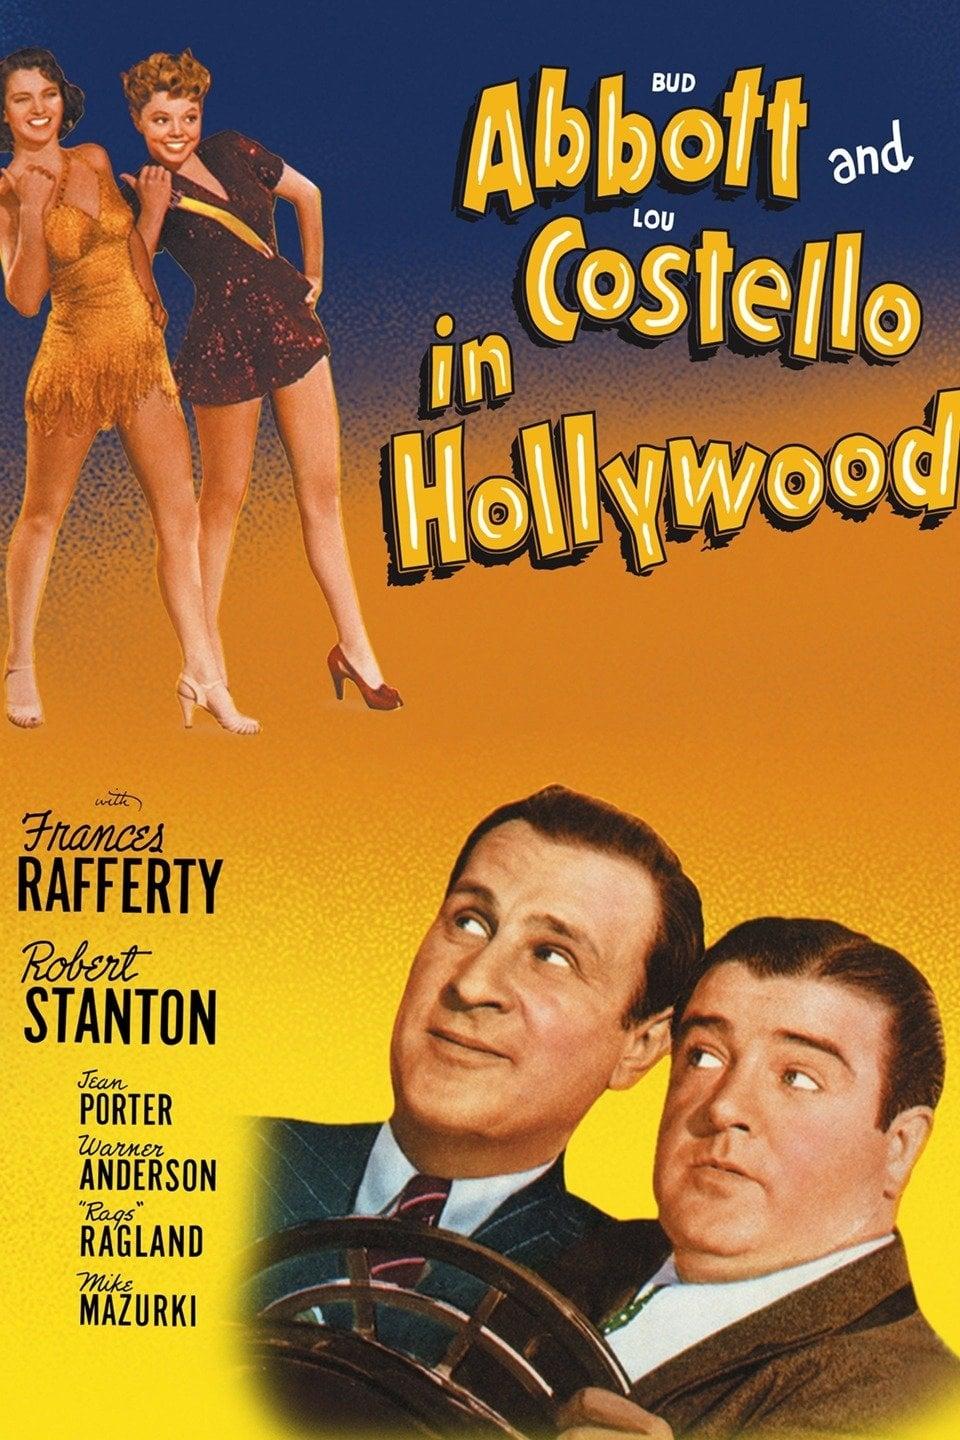 Bud Abbott and Lou Costello in Hollywood poster